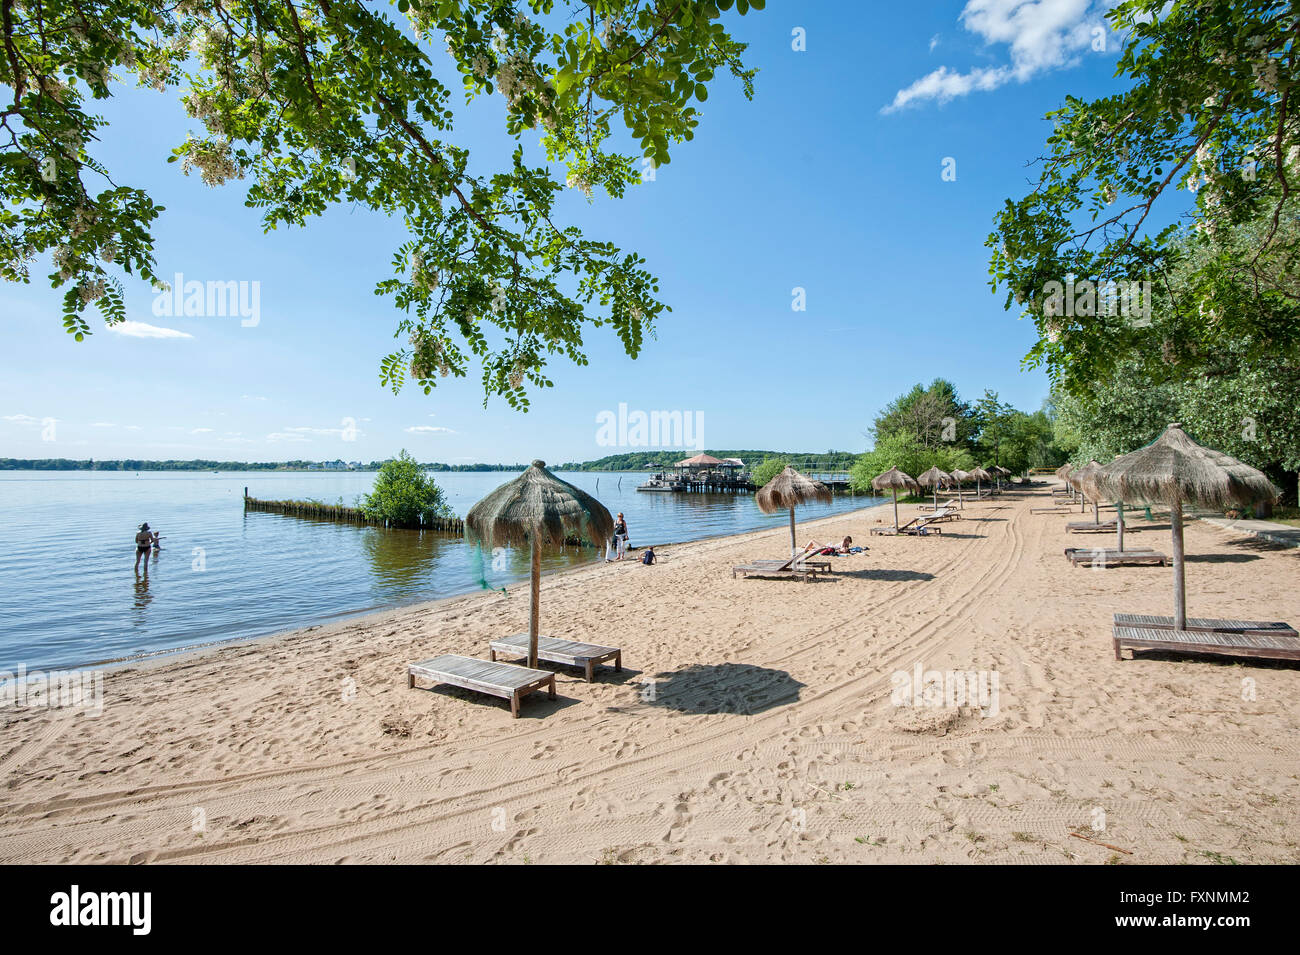 Plage, Lac Schwielowsee, beach resort, Caputh, Brandebourg, Allemagne Banque D'Images